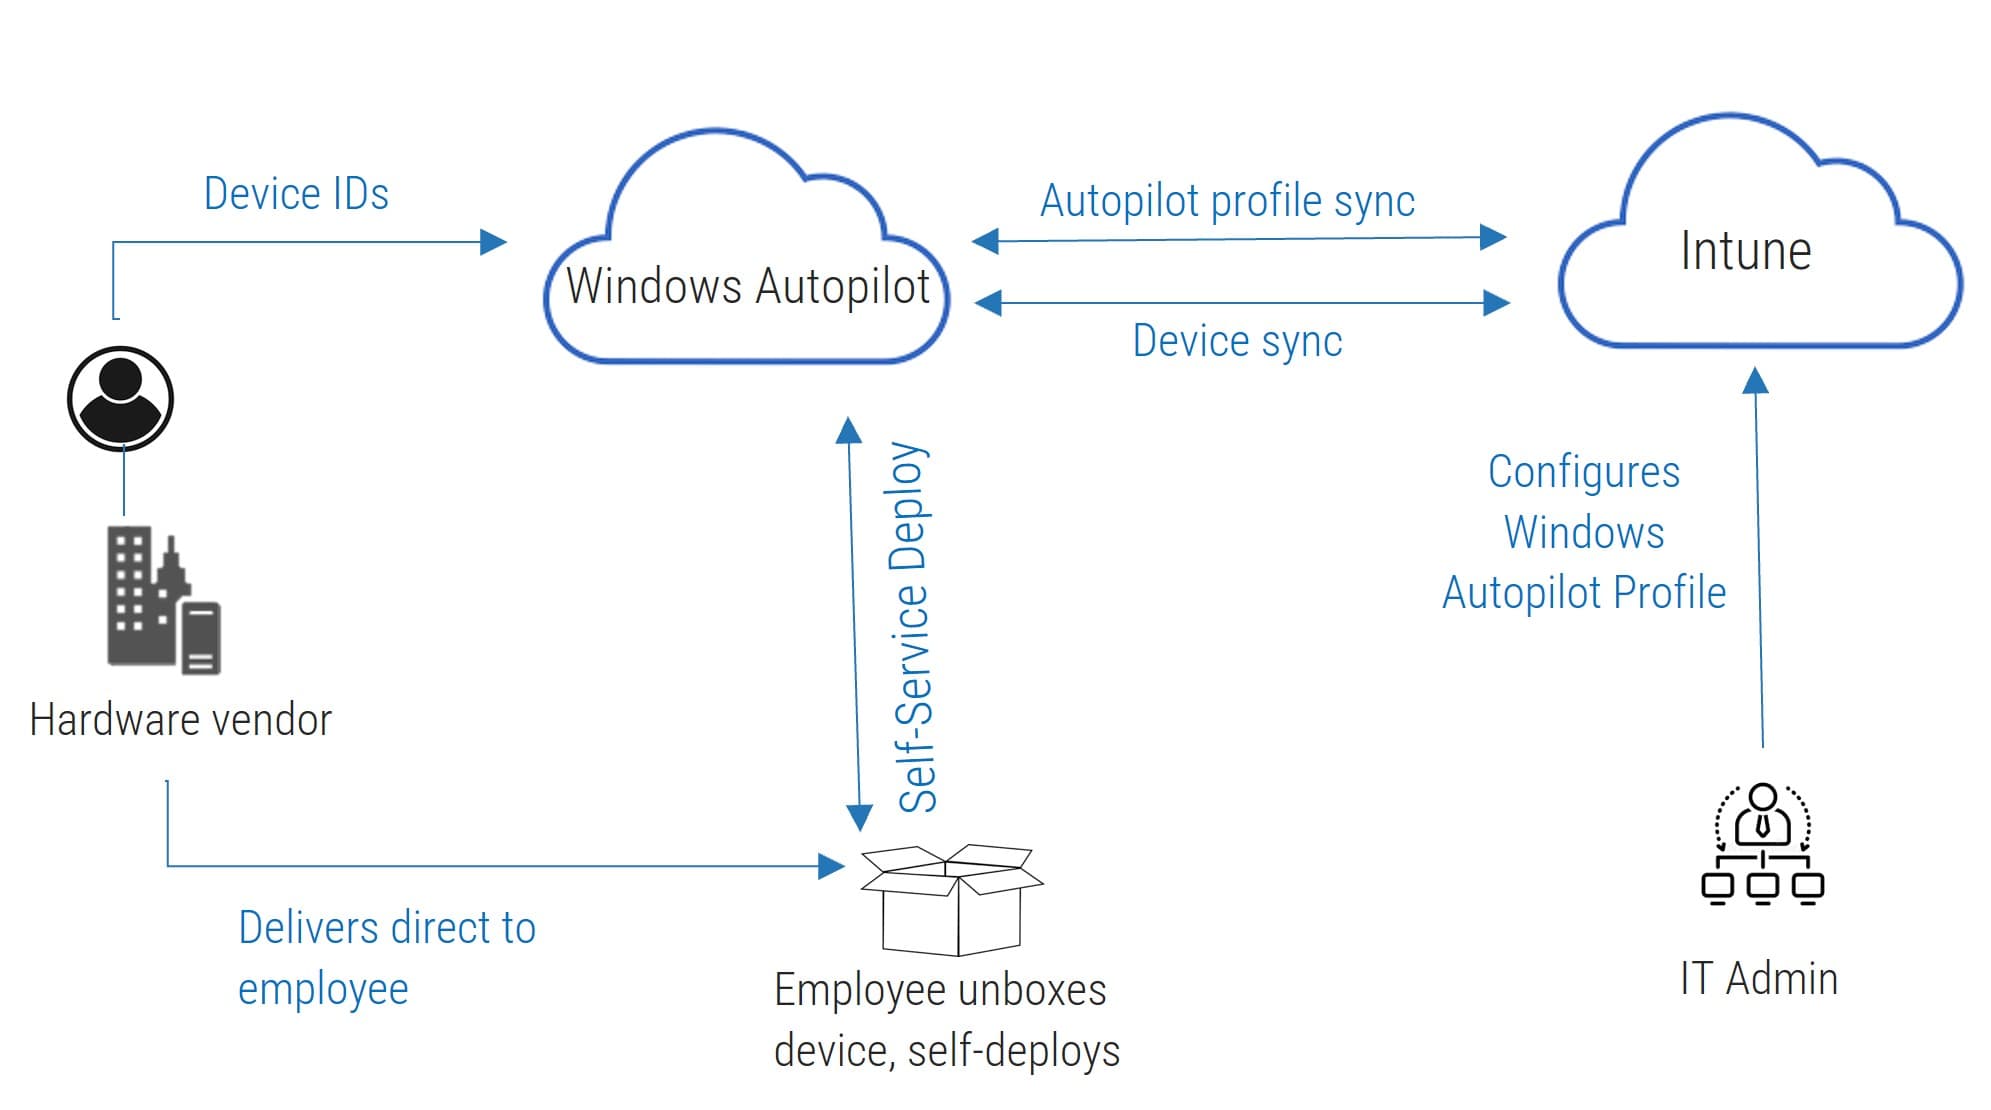 The image contains a screenshot of the Intune/Autopilot Overview.